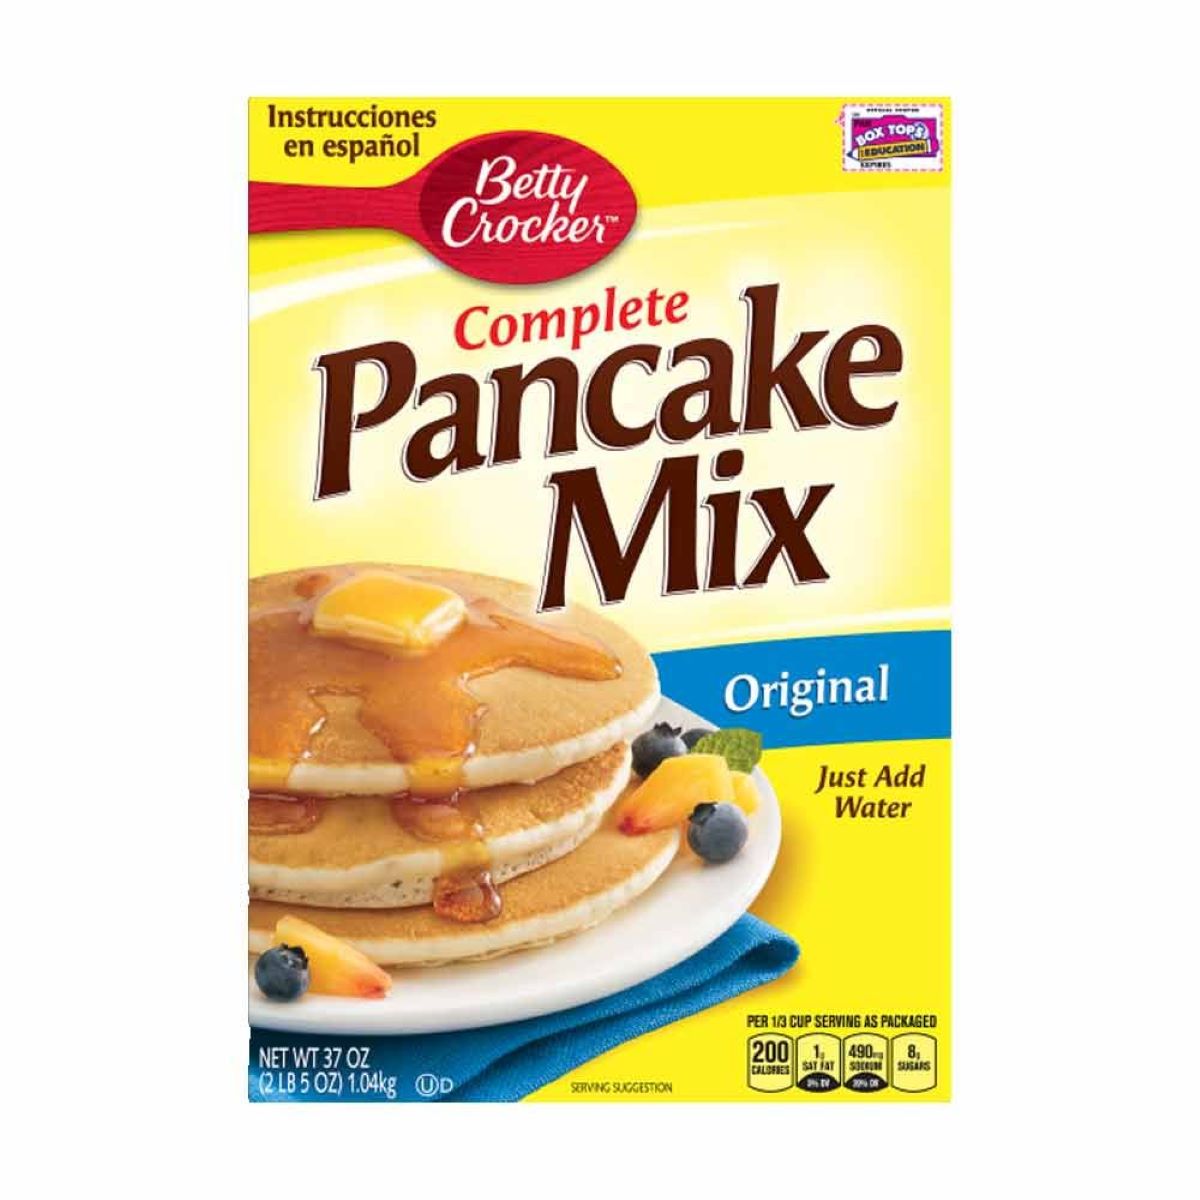 How To Store Pancake Mix